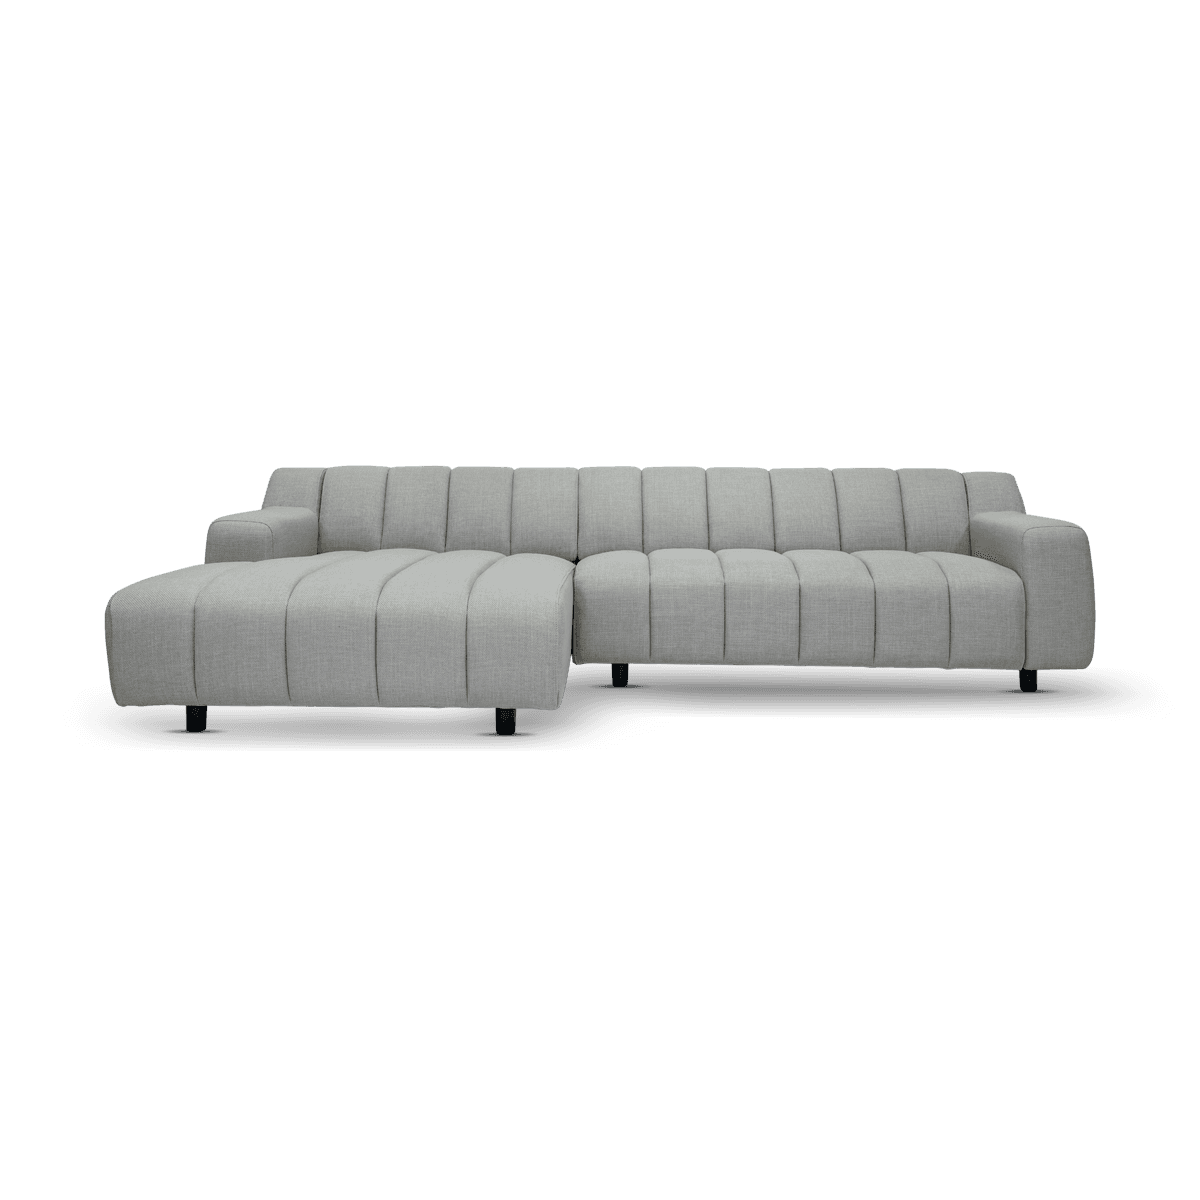 Oakland 2.5-Seater Sofa with Left Chaise Longue, Beige